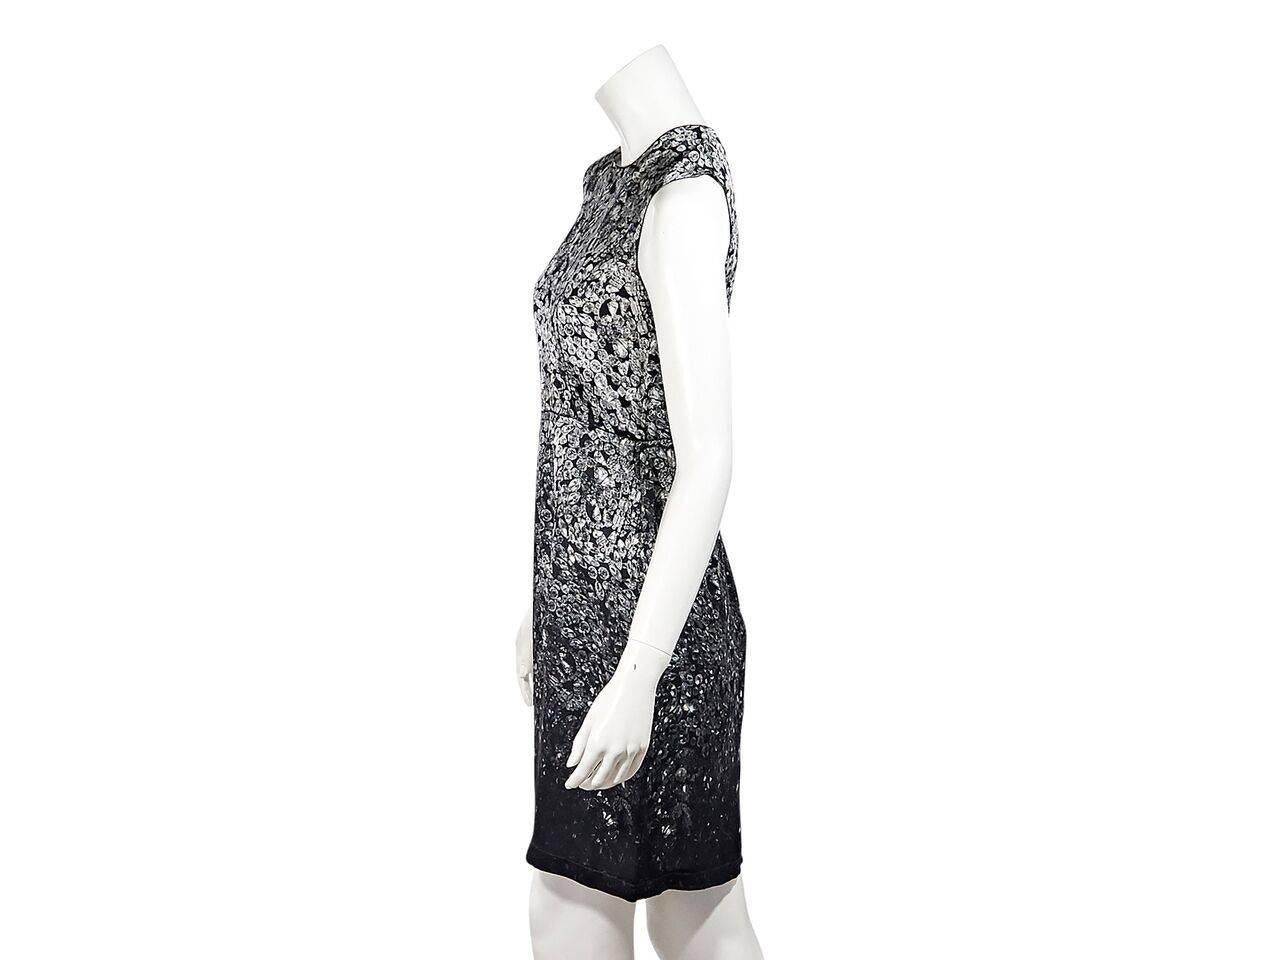 Product details:  Grey crystal-printed sheath dress by Lanvin.  Crewneck.  Sleeveless.  
Condition: Pre-owned. Very good.
Est. Retail $ 1,695.00